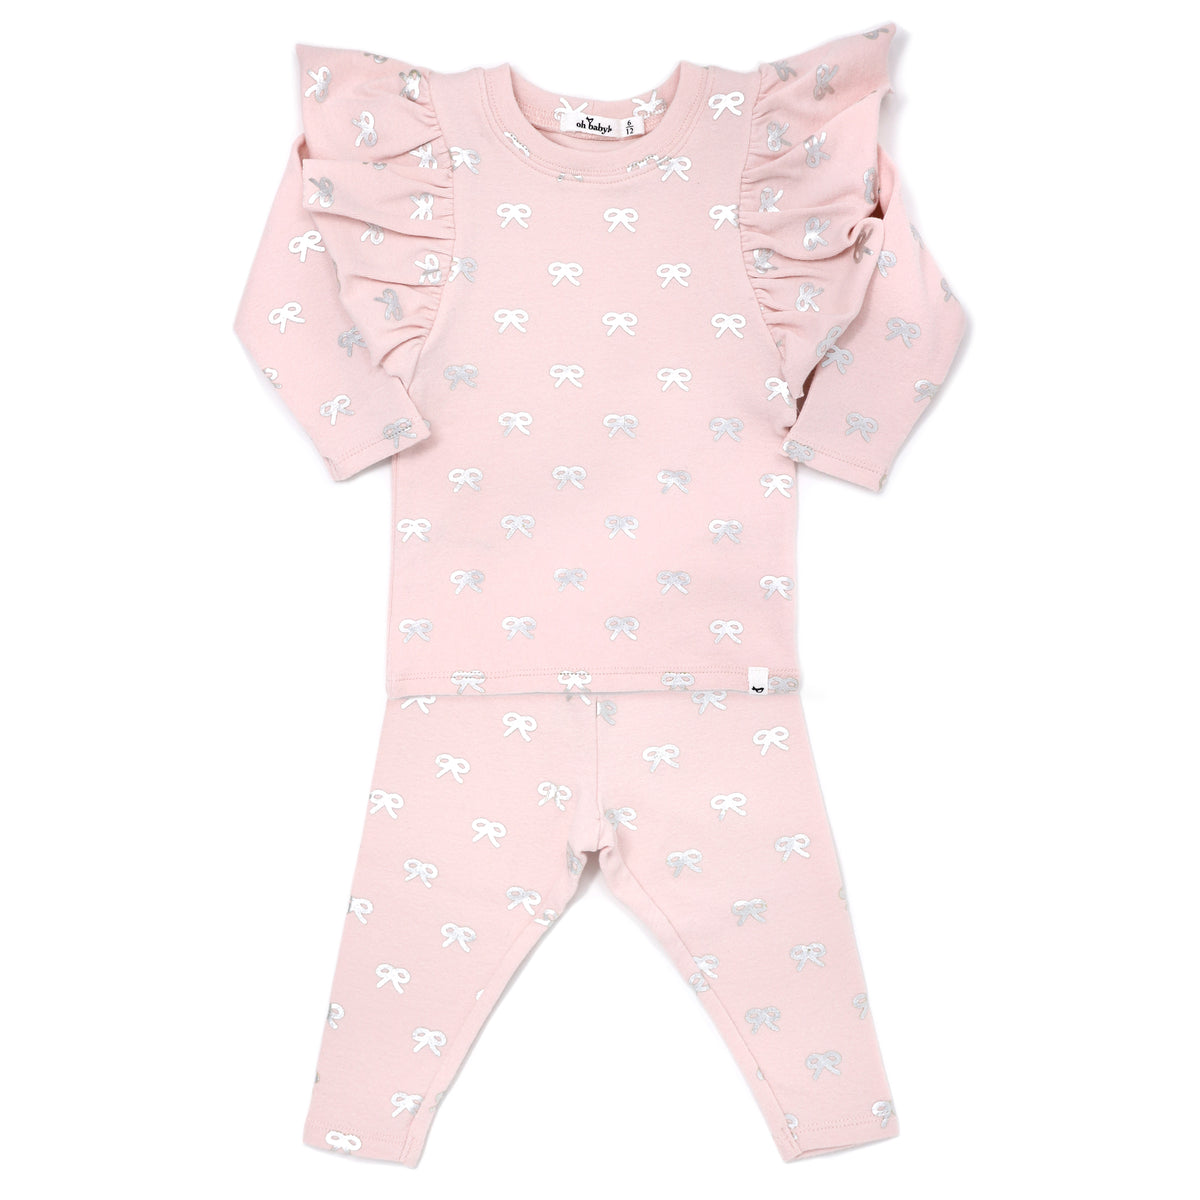 oh baby! Two Piece Set - Silver Bows Butterfly Sleeve - Pale Pink